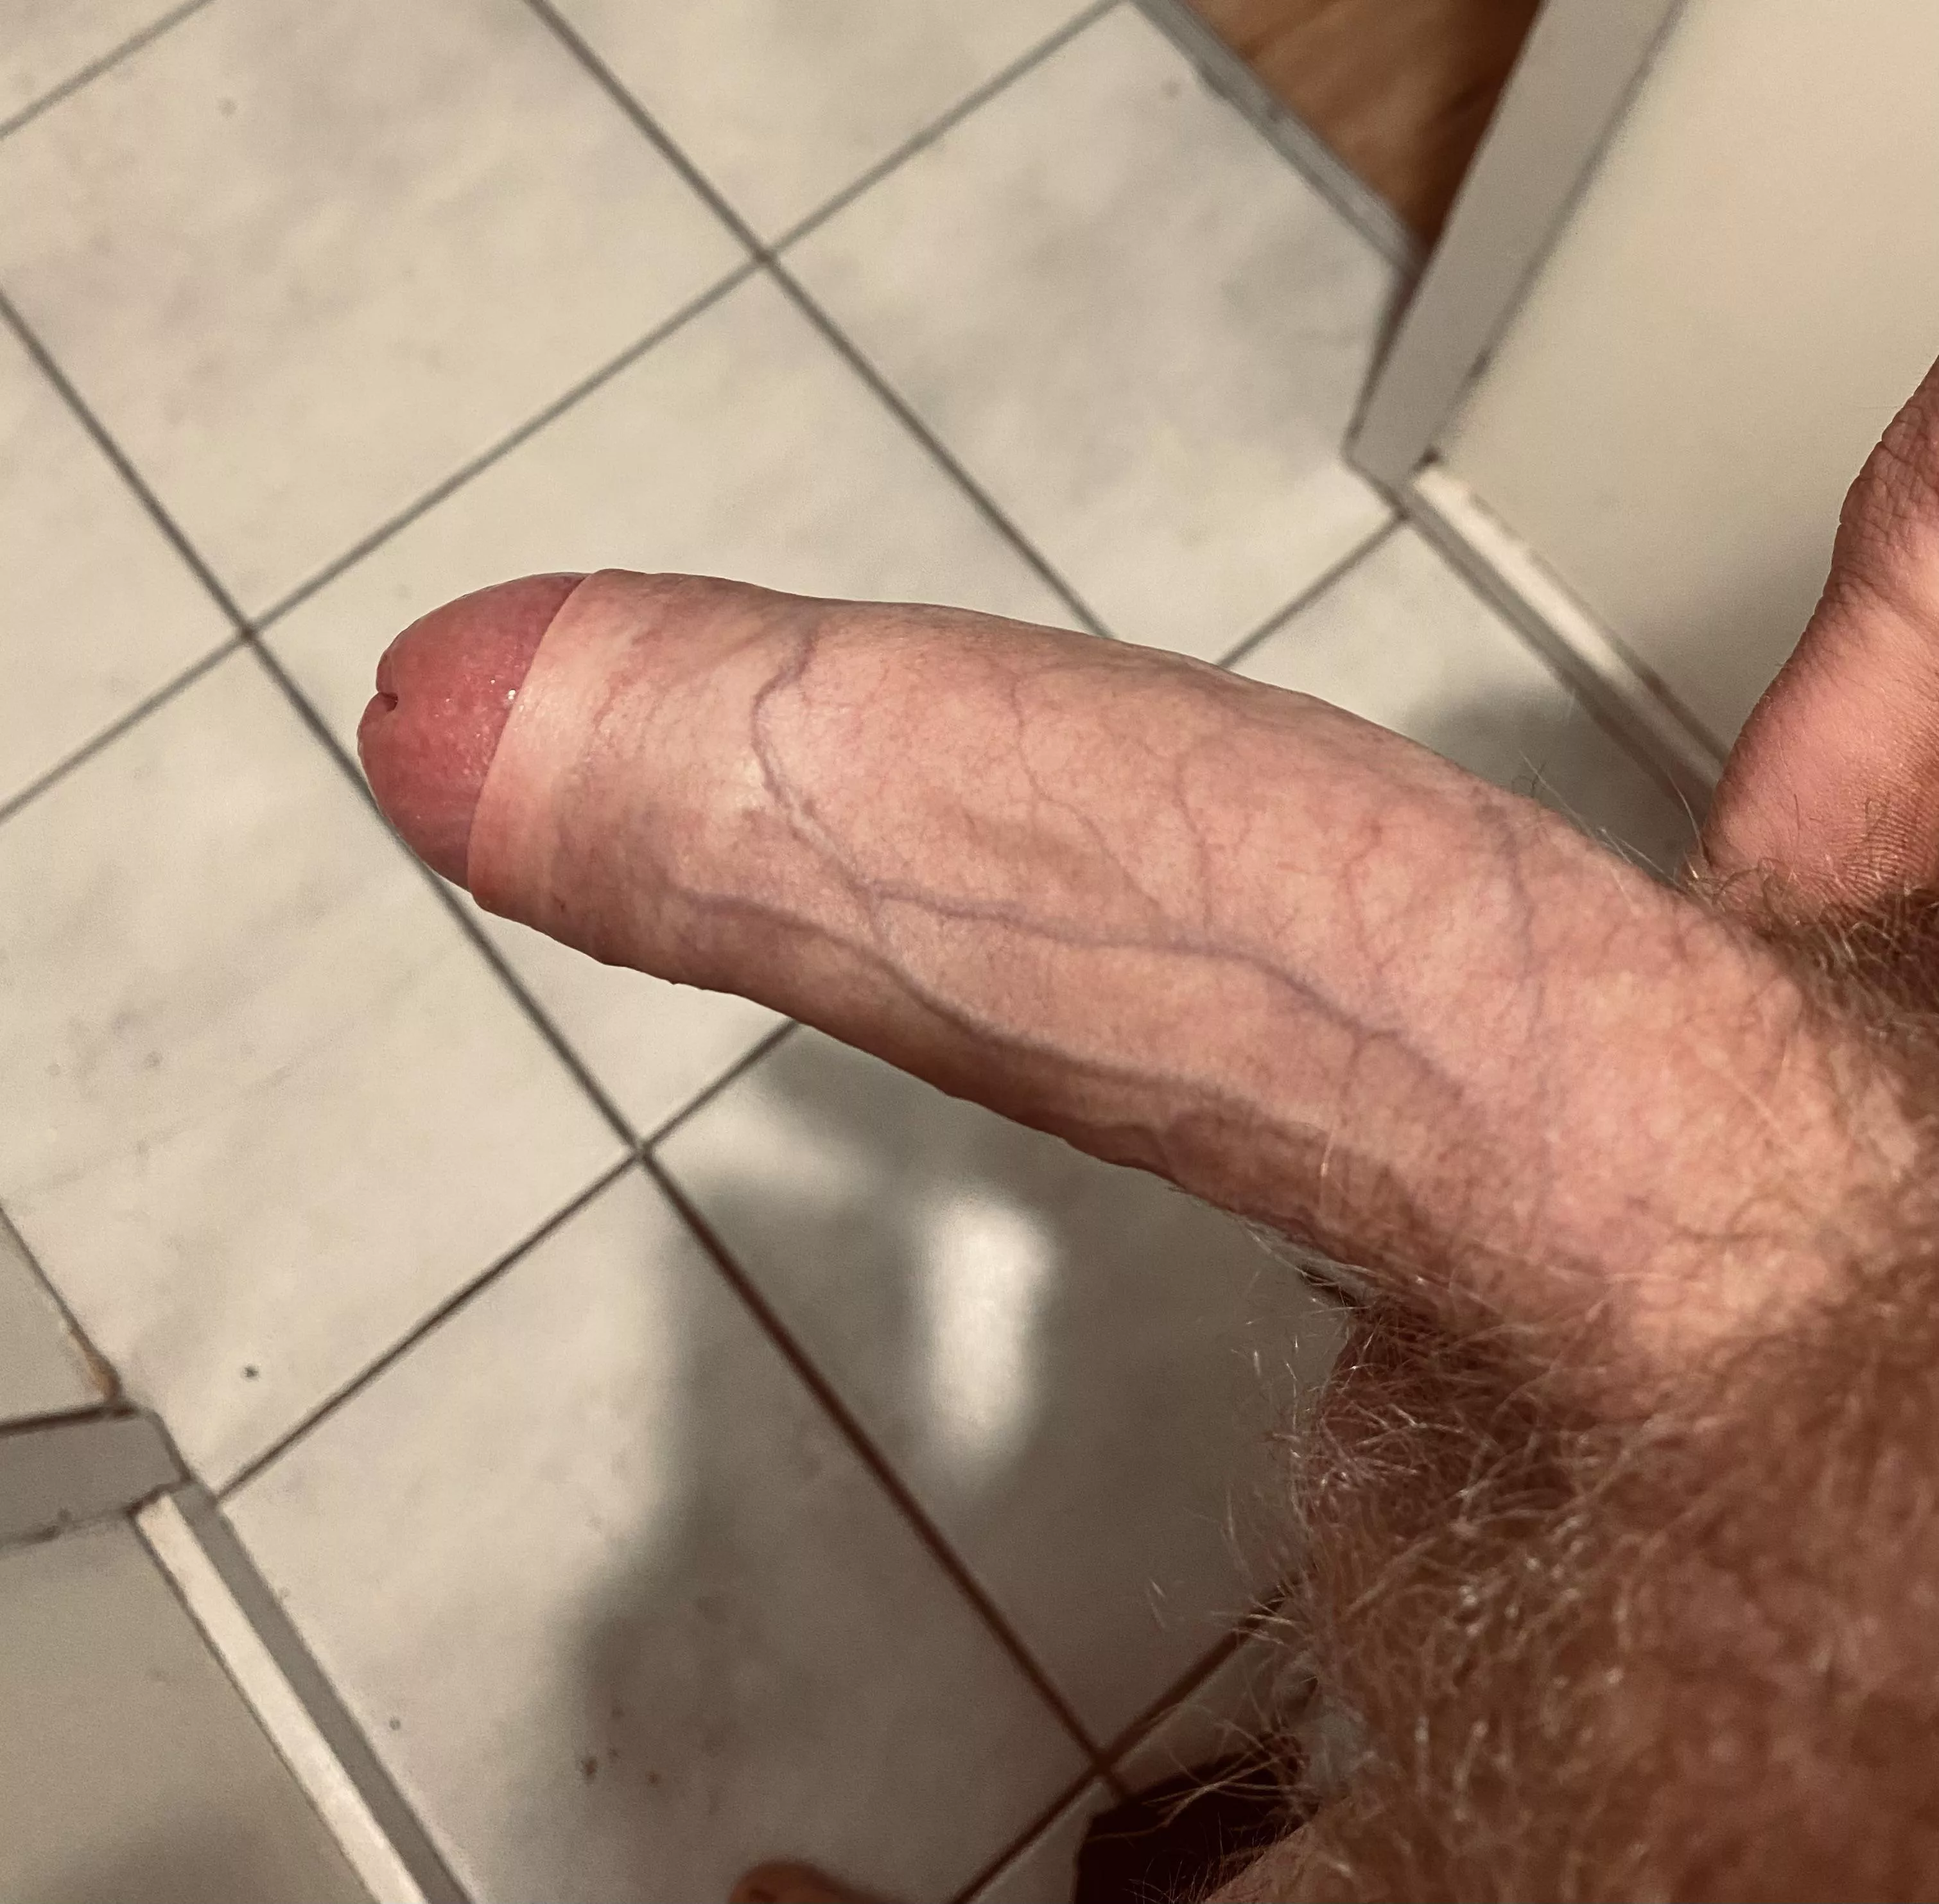 Uncut And Veiny Nudes Foreskin Nude Pics Org